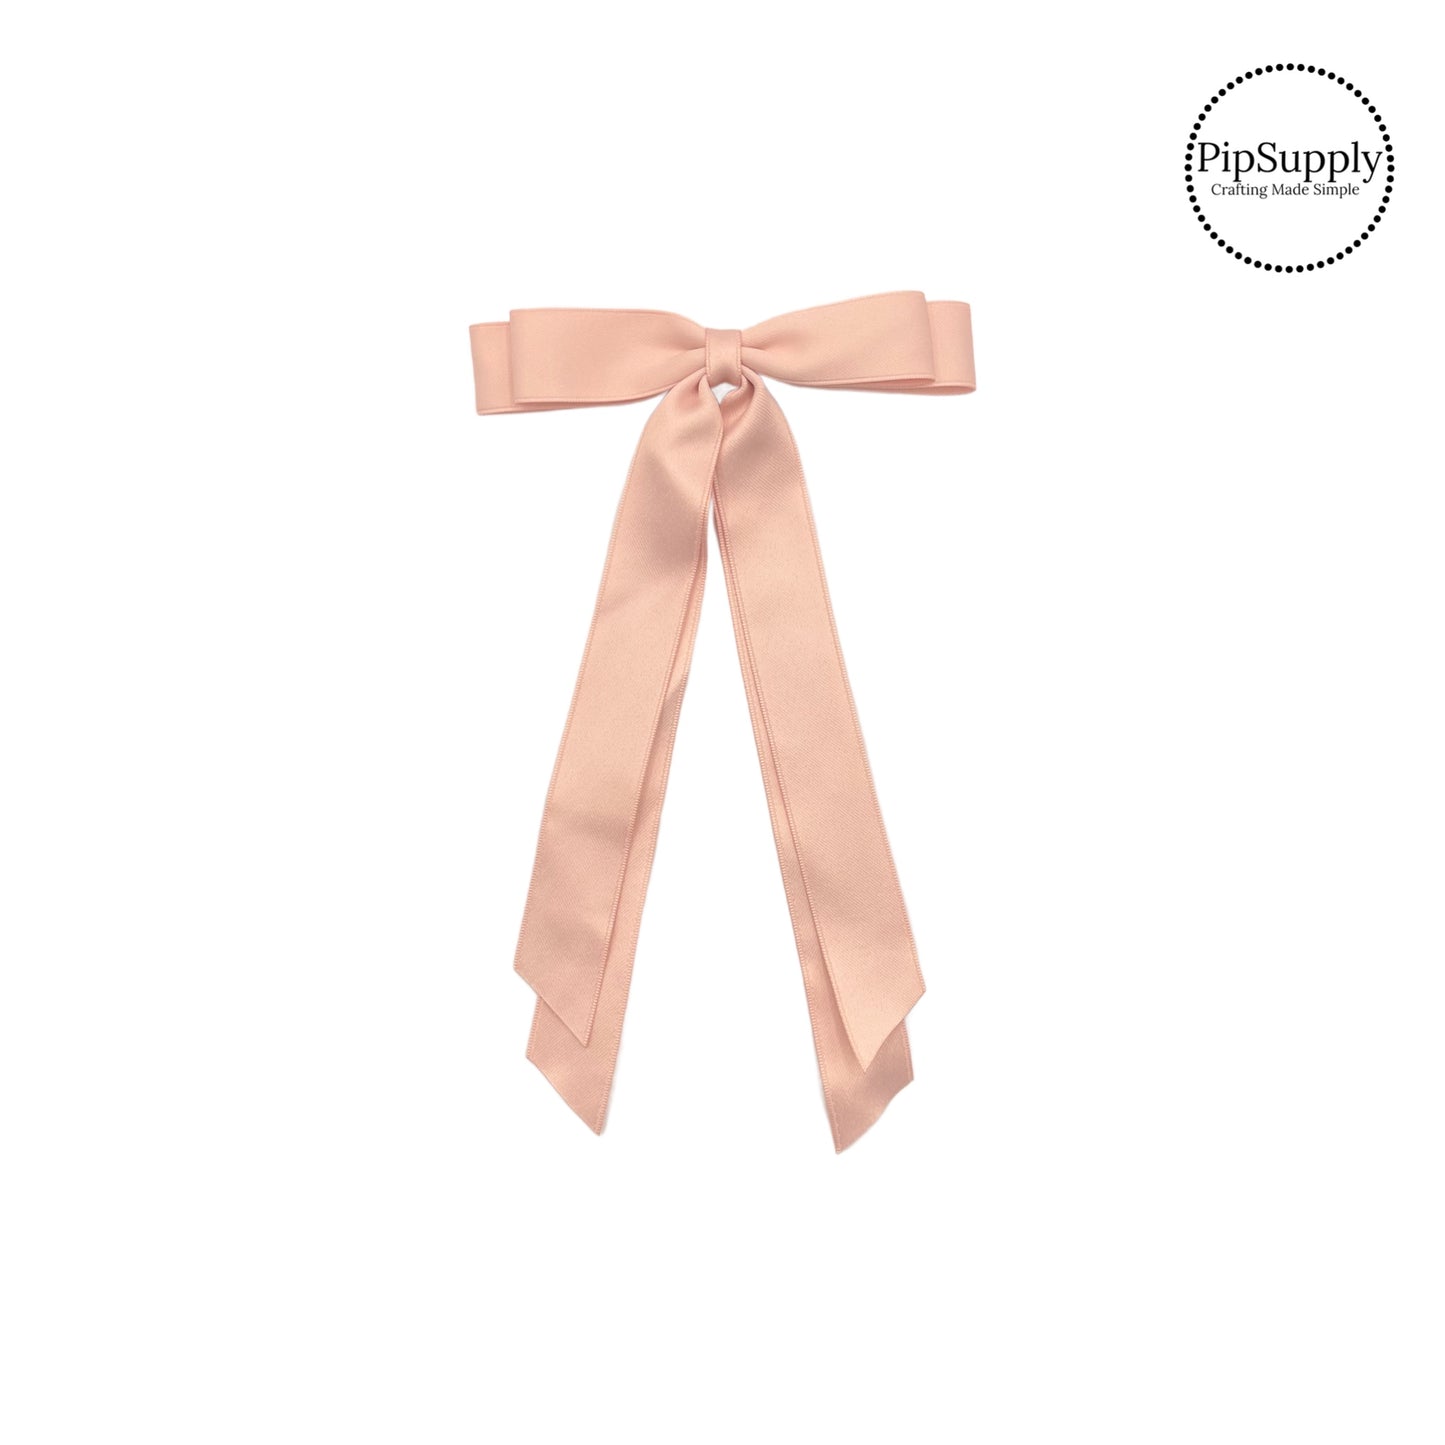 Theses stacked long ribbon hair bows are ready to package and resell to your customers no sewing or measuring necessary! These come pre-tied with an attached alligator clip. The delicate bow is perfect for all hair styles for kids and adults.